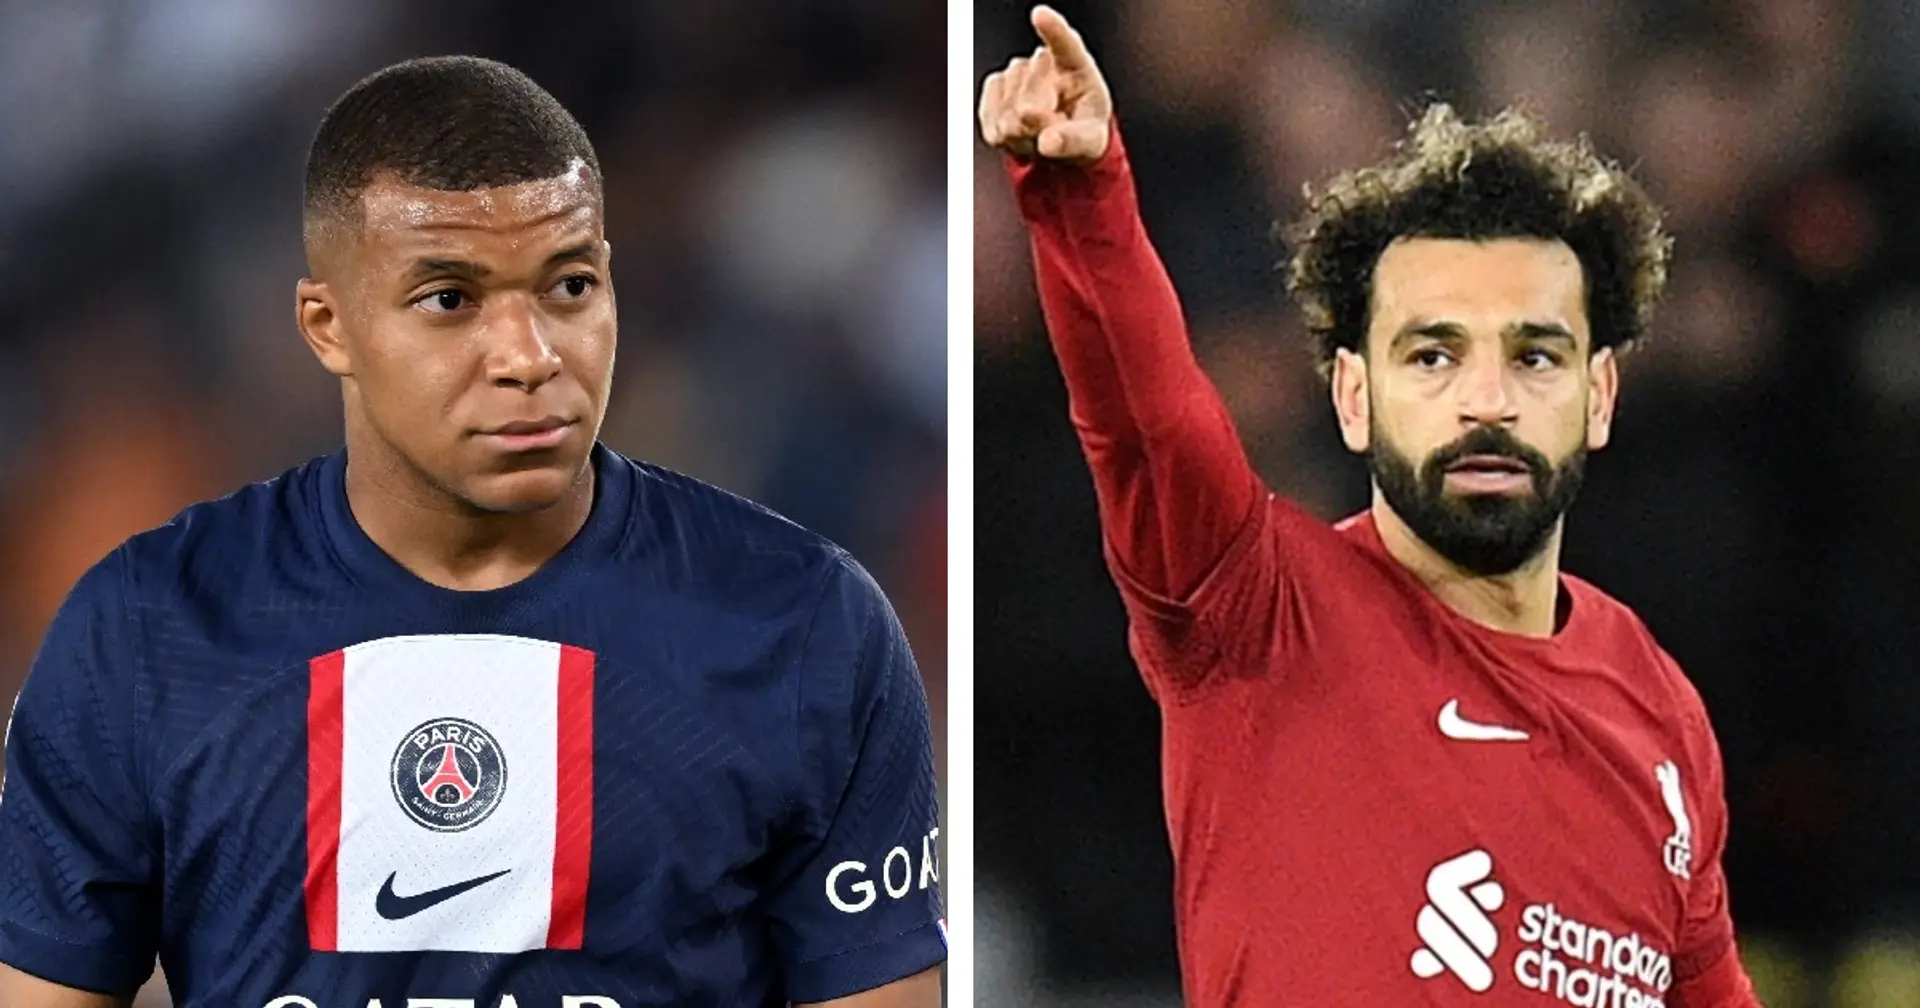 Champions League top scorers after group stages – Salah level with Mbappe